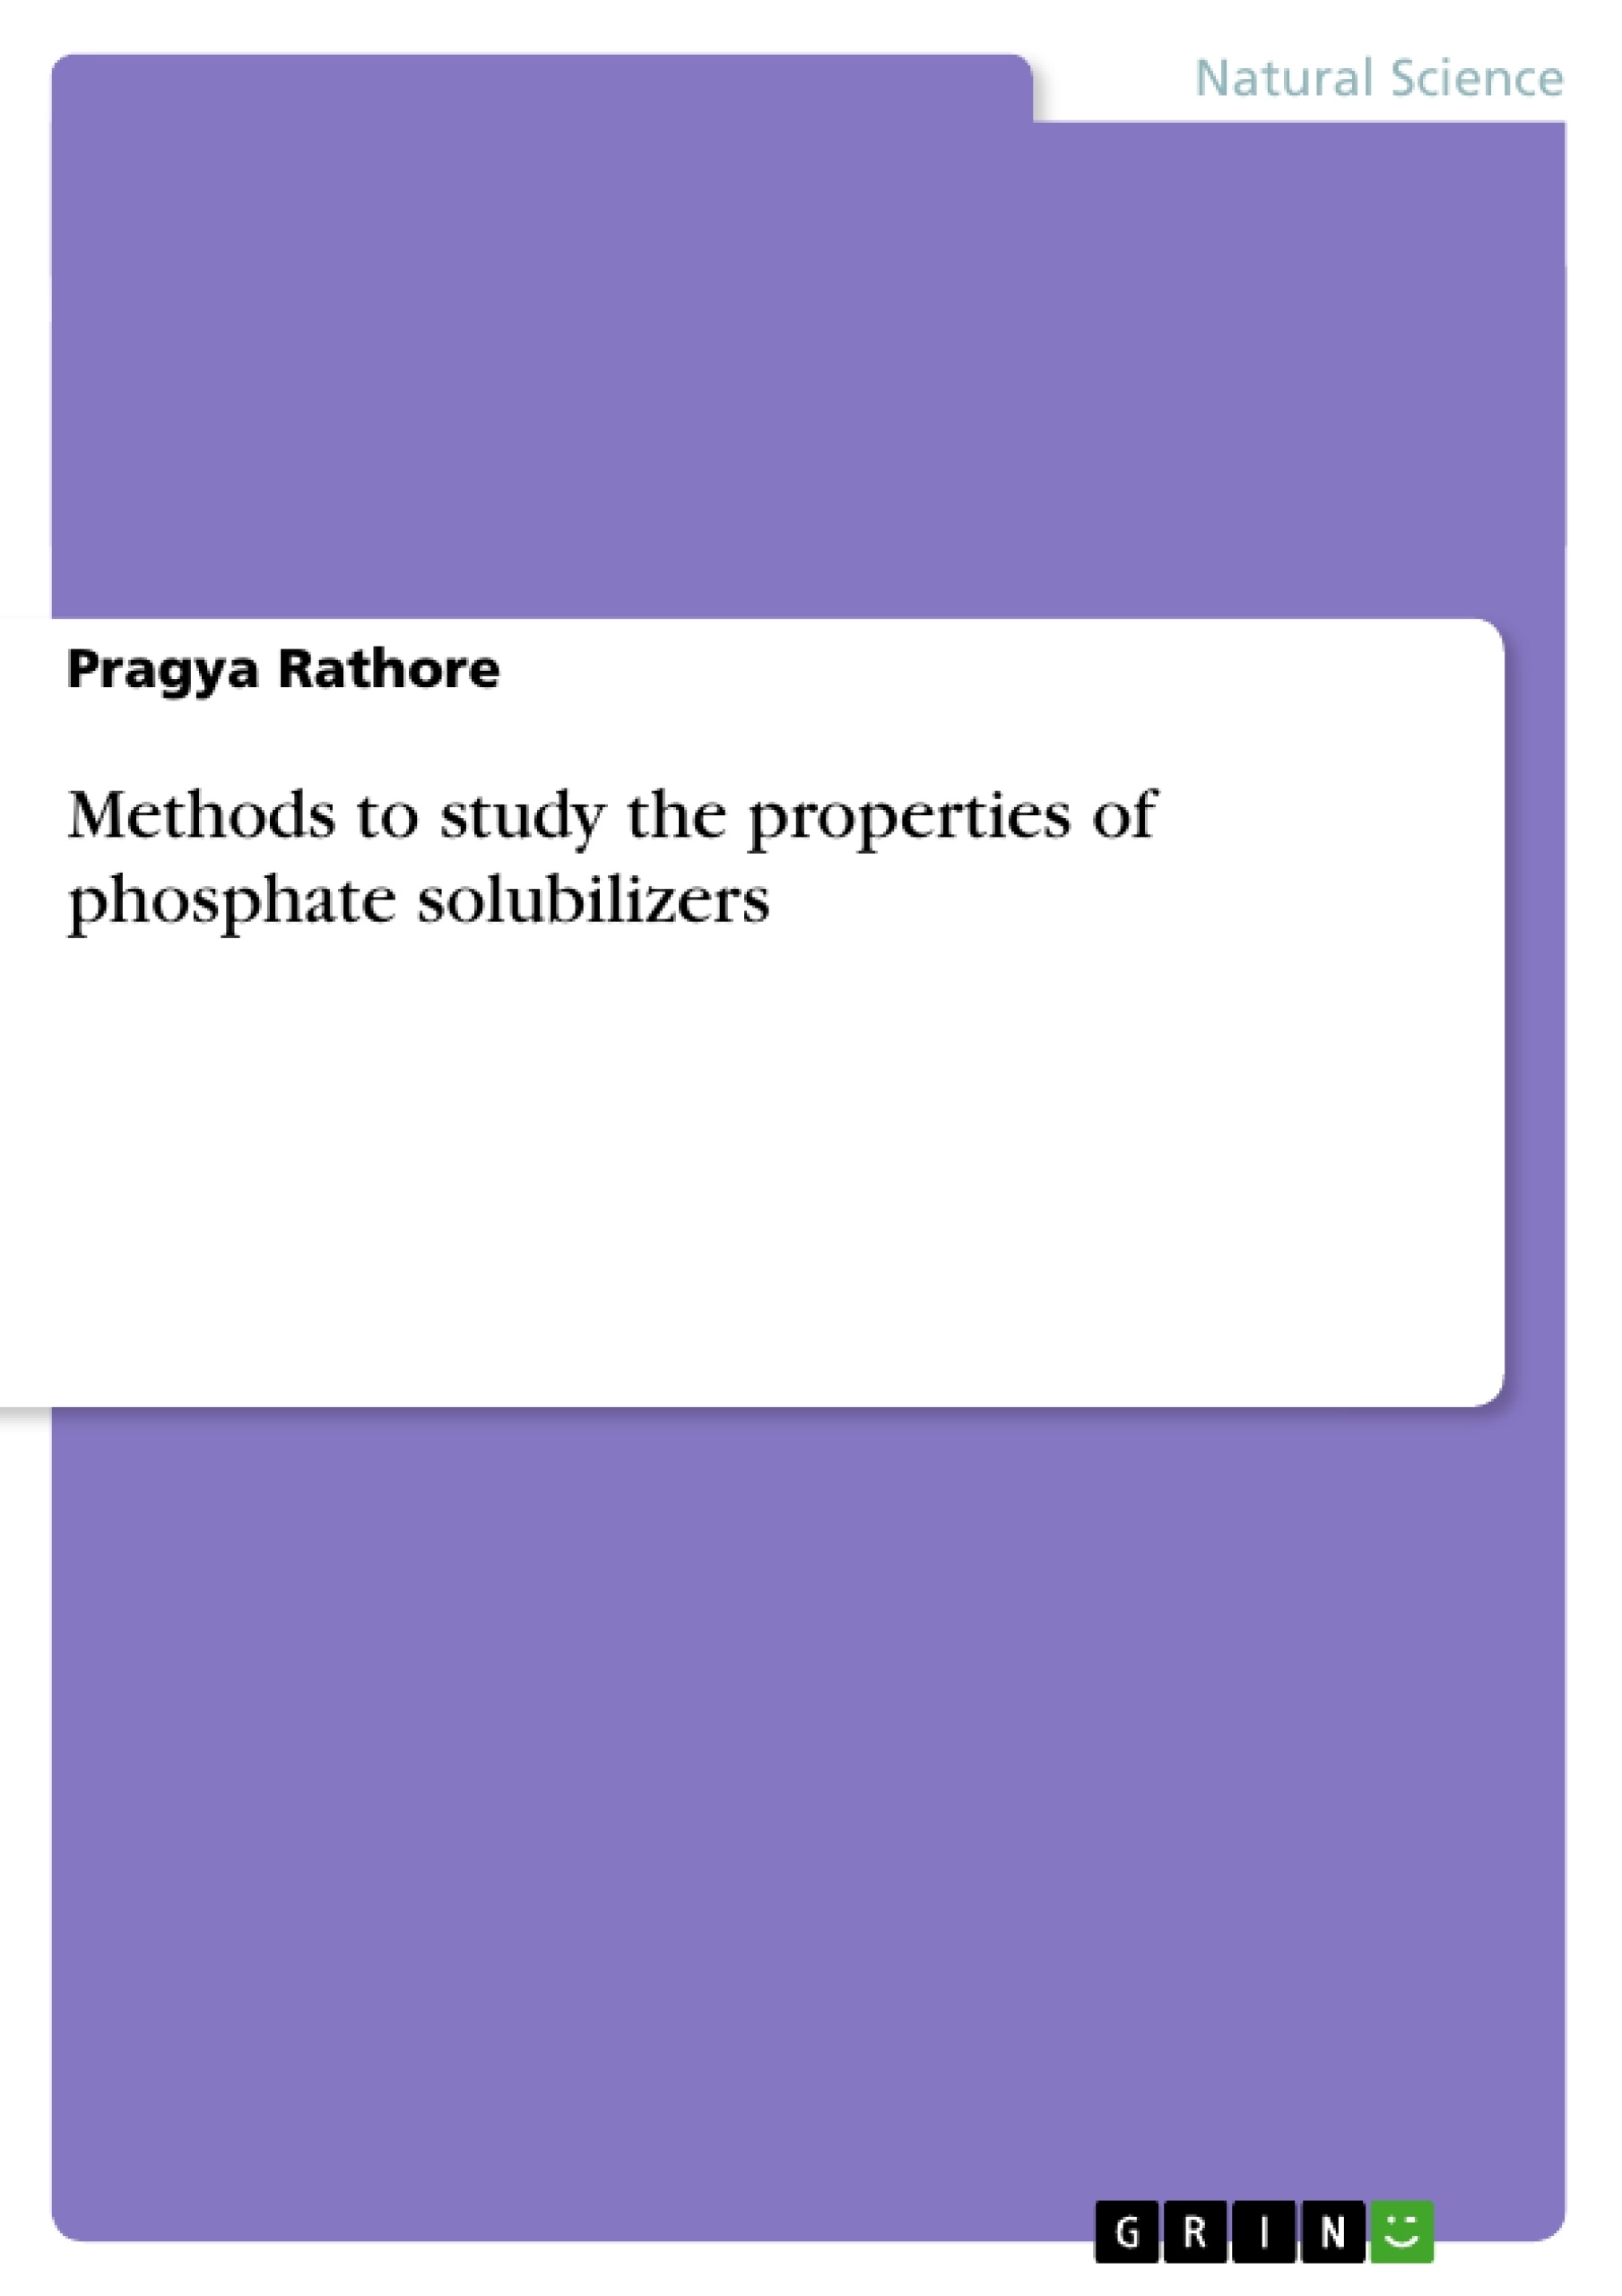 Título: Methods to study the properties of phosphate solubilizers